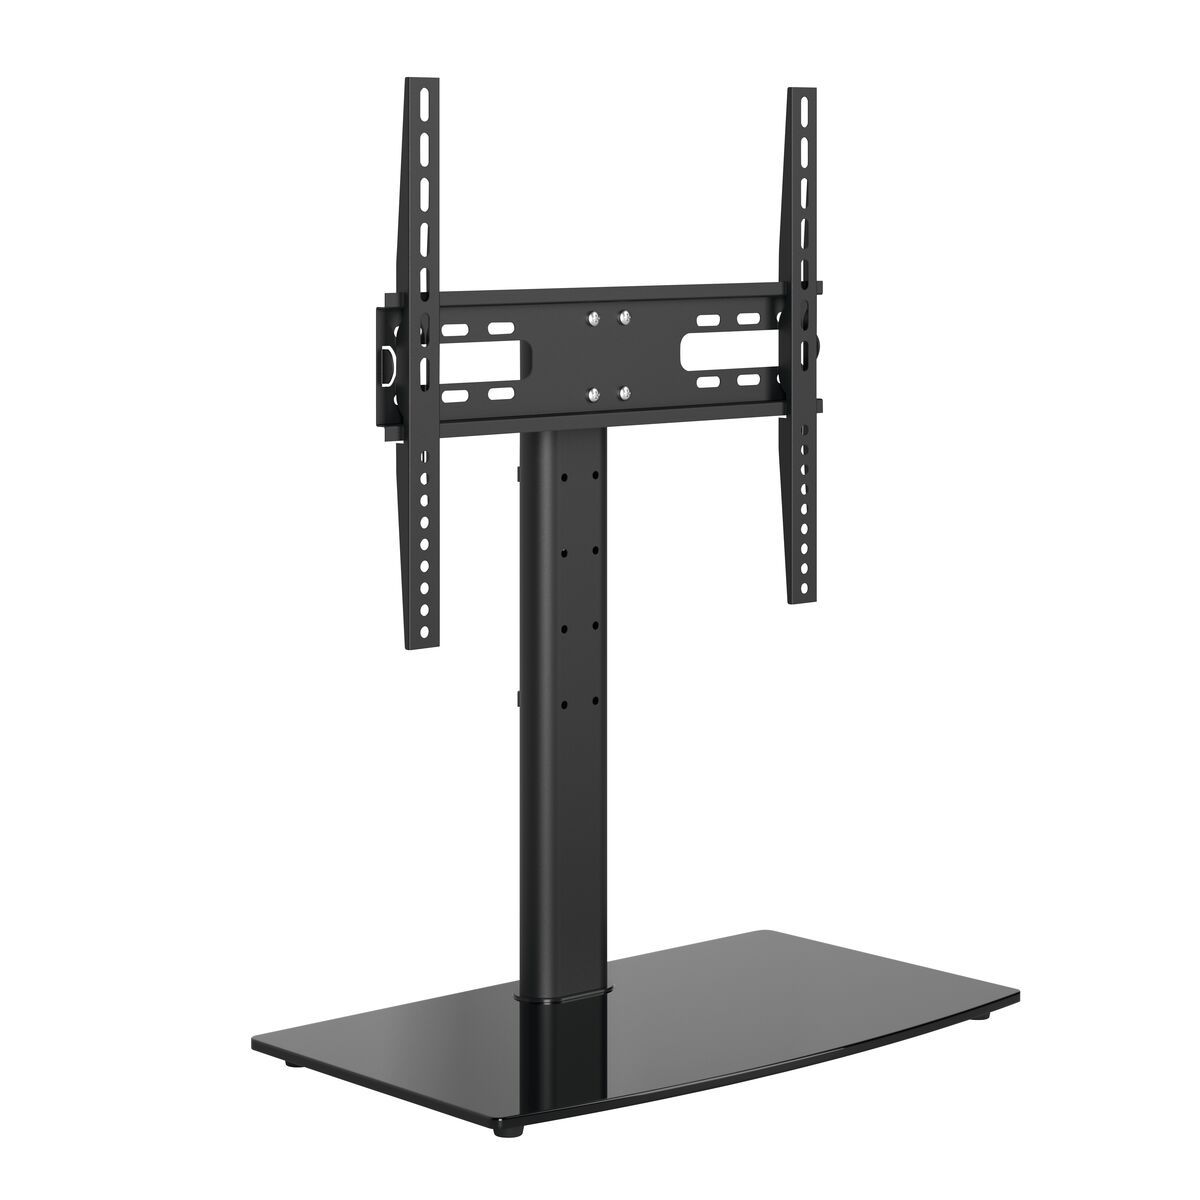 Vogel's MS3085 Tabletop TV stand - Suitable for 32 up to 65 inch TVs - Up to 50° - Product